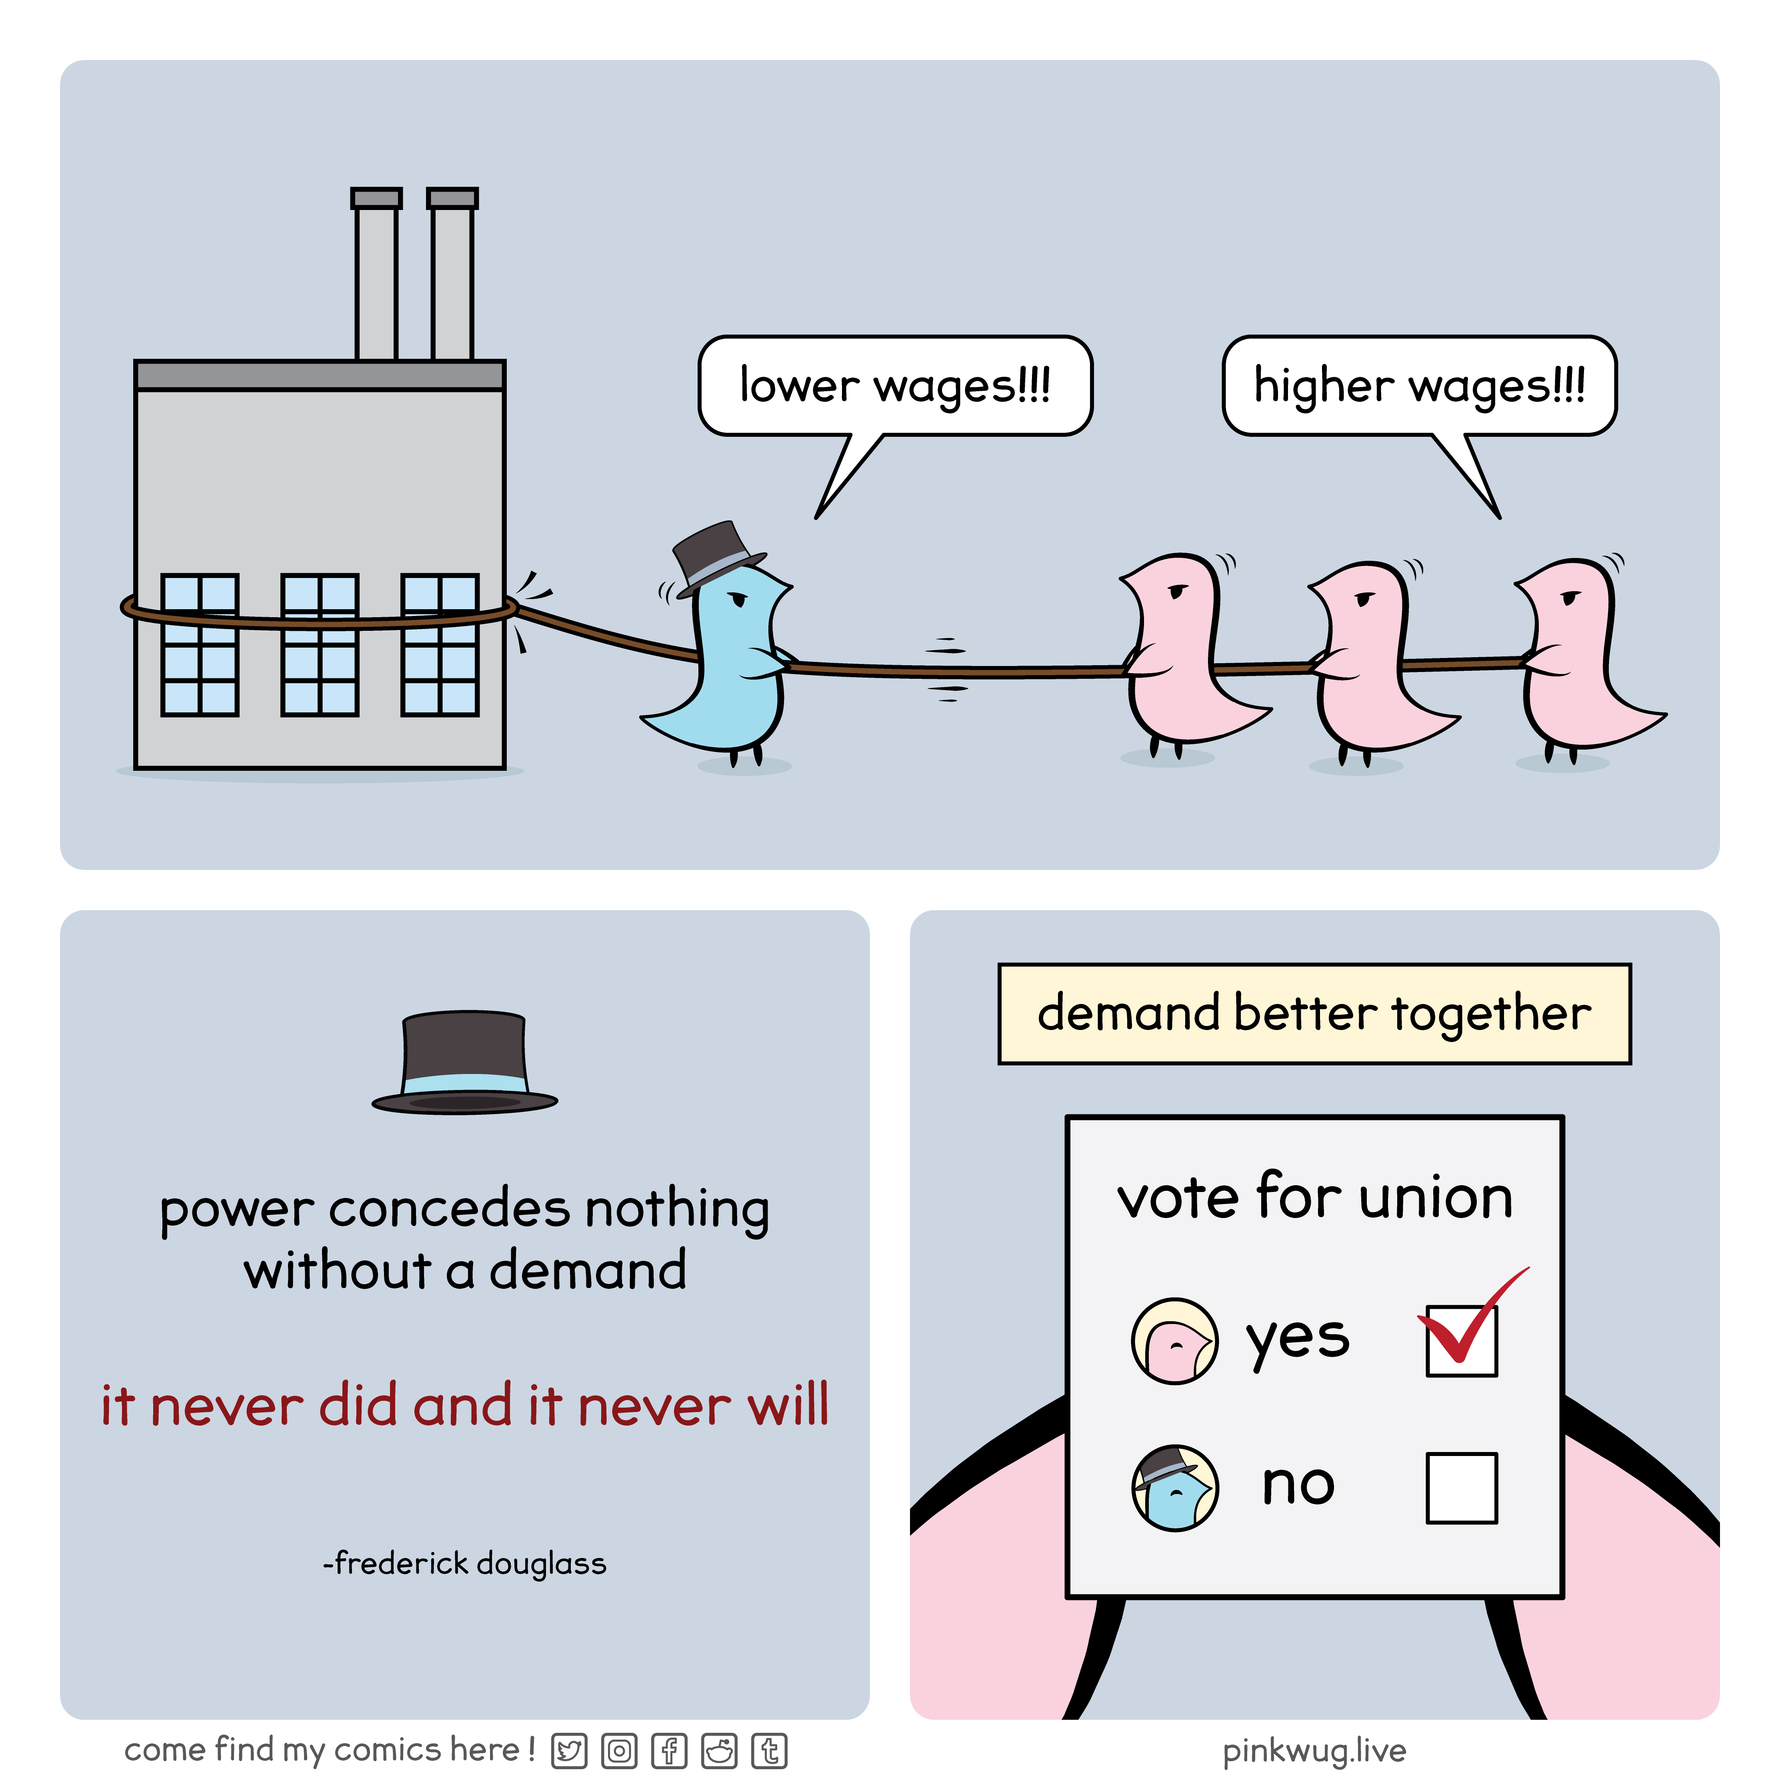 pinkwug comic: Blue wug pulls string attached to factory and says "lower wages!!!!"
3 wugs pull and say "higher wages!!!"
Power concedes nothing without a demand
it never did and it never will -Frederick Douglass
demand better together, vote yes for union